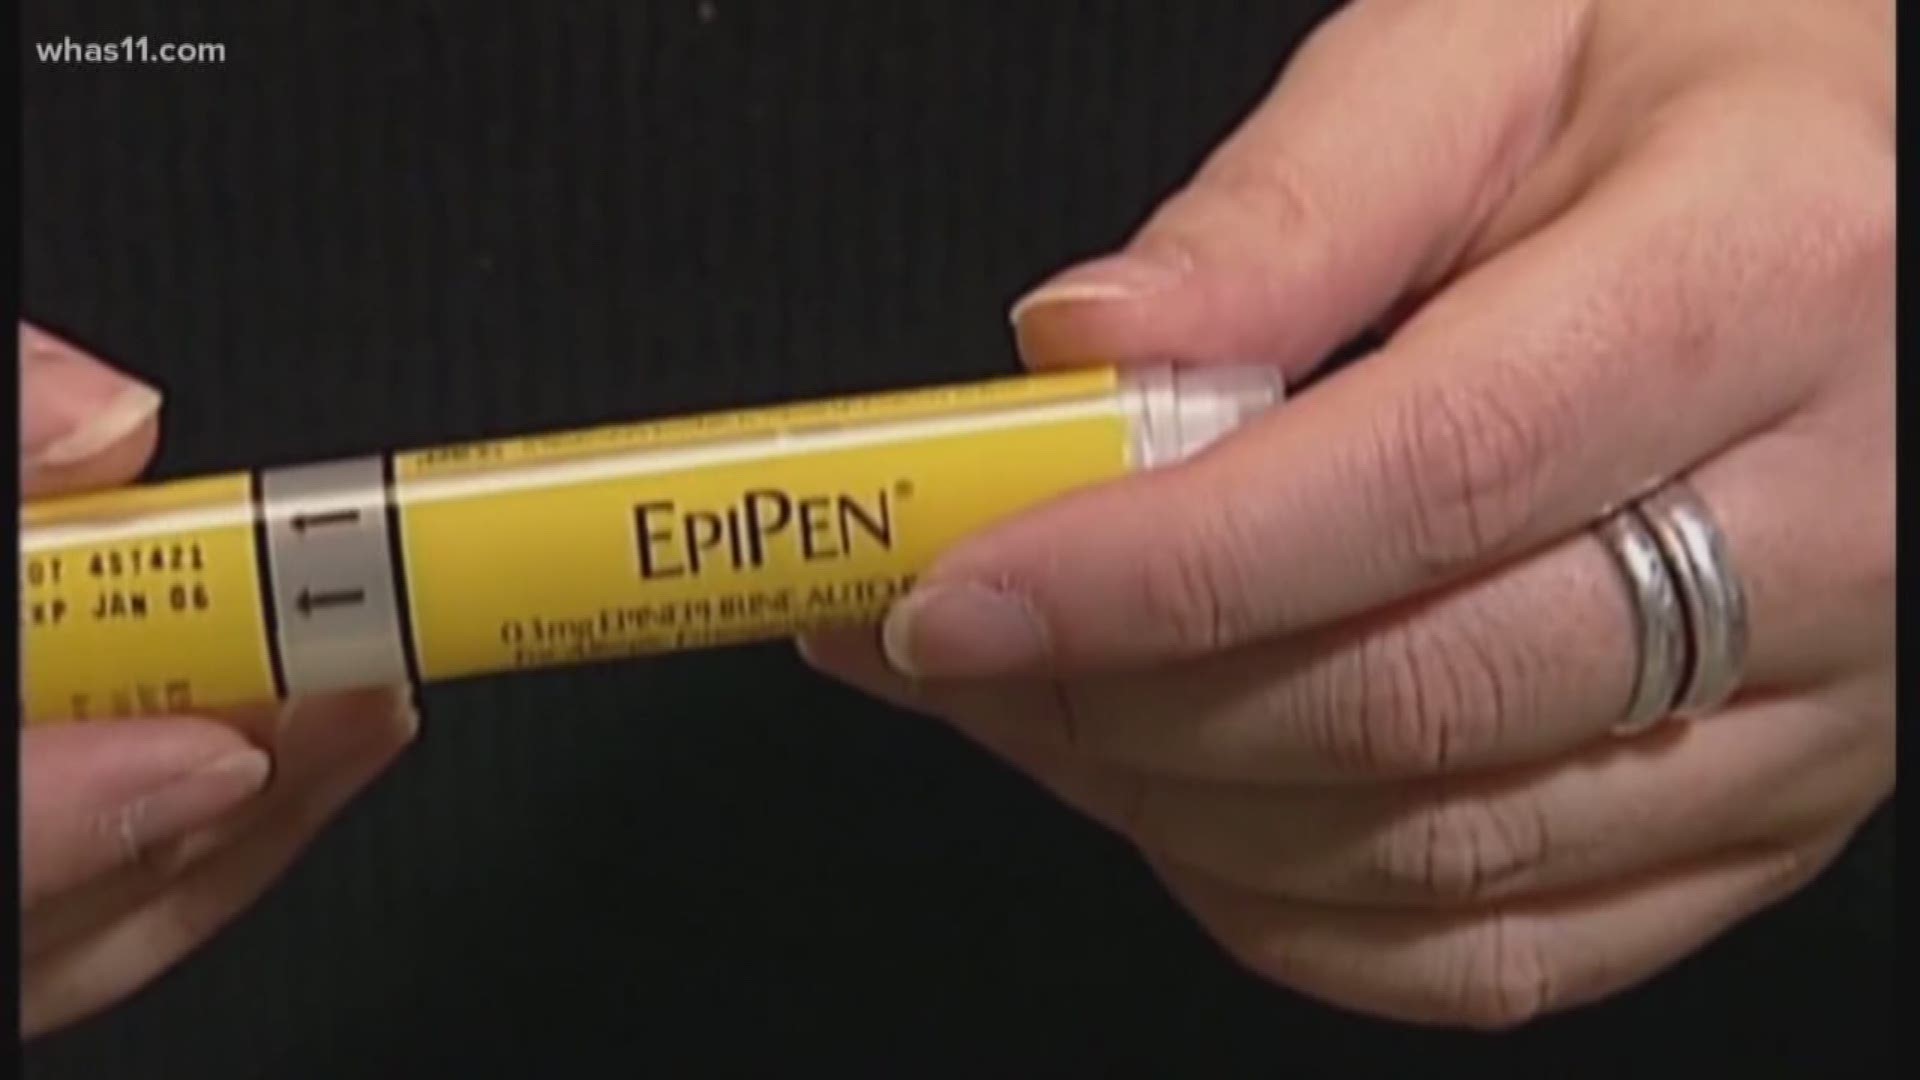 EpiPen shortage: What to do if your local pharmacy runs out